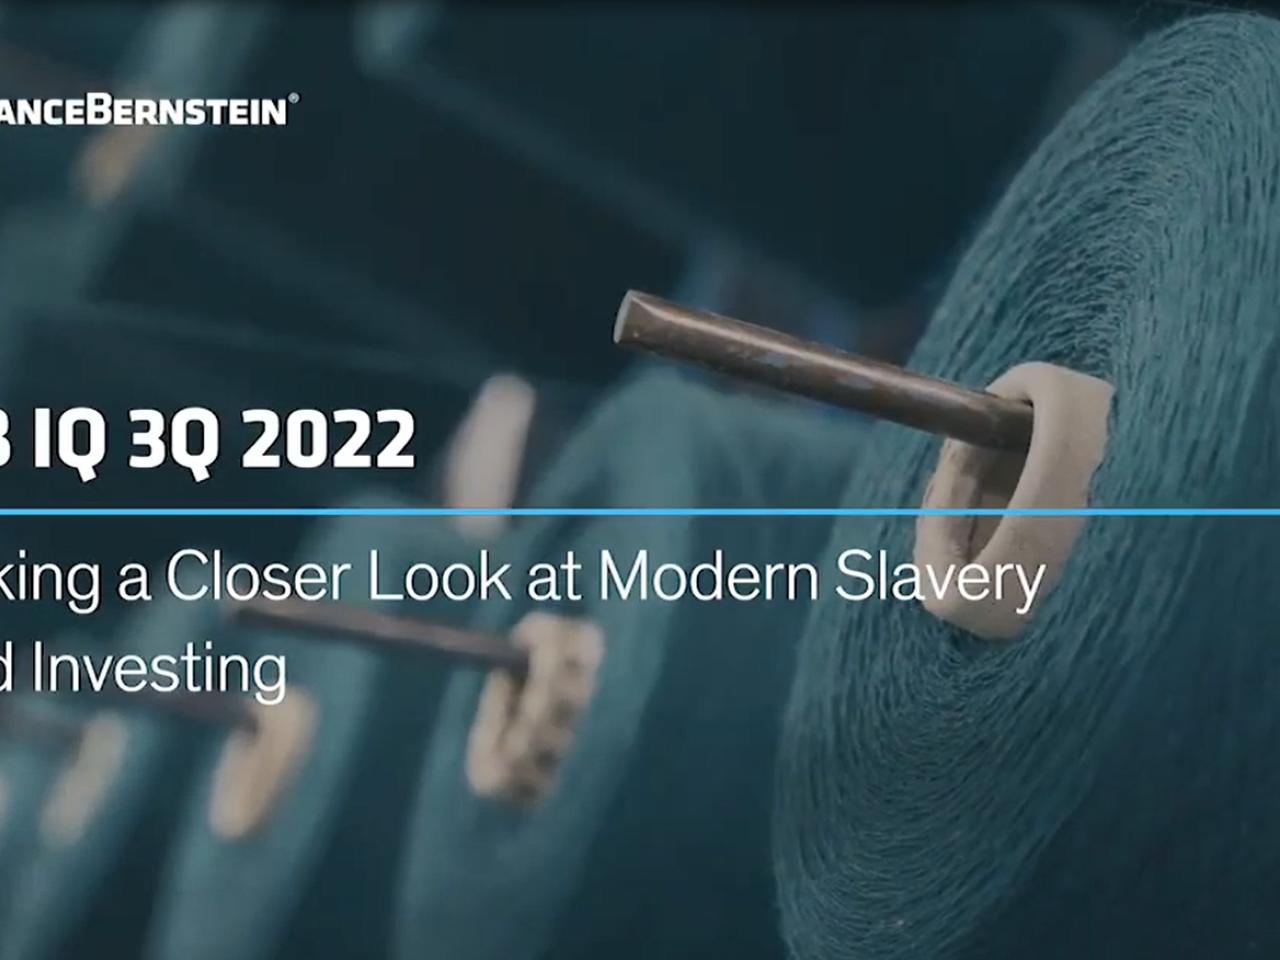 AllianceBernstein logo in top left, Rows of spools of thread as the background. "AB IQ 3Q 2022. Taking a closer look at modern slavery and investing."